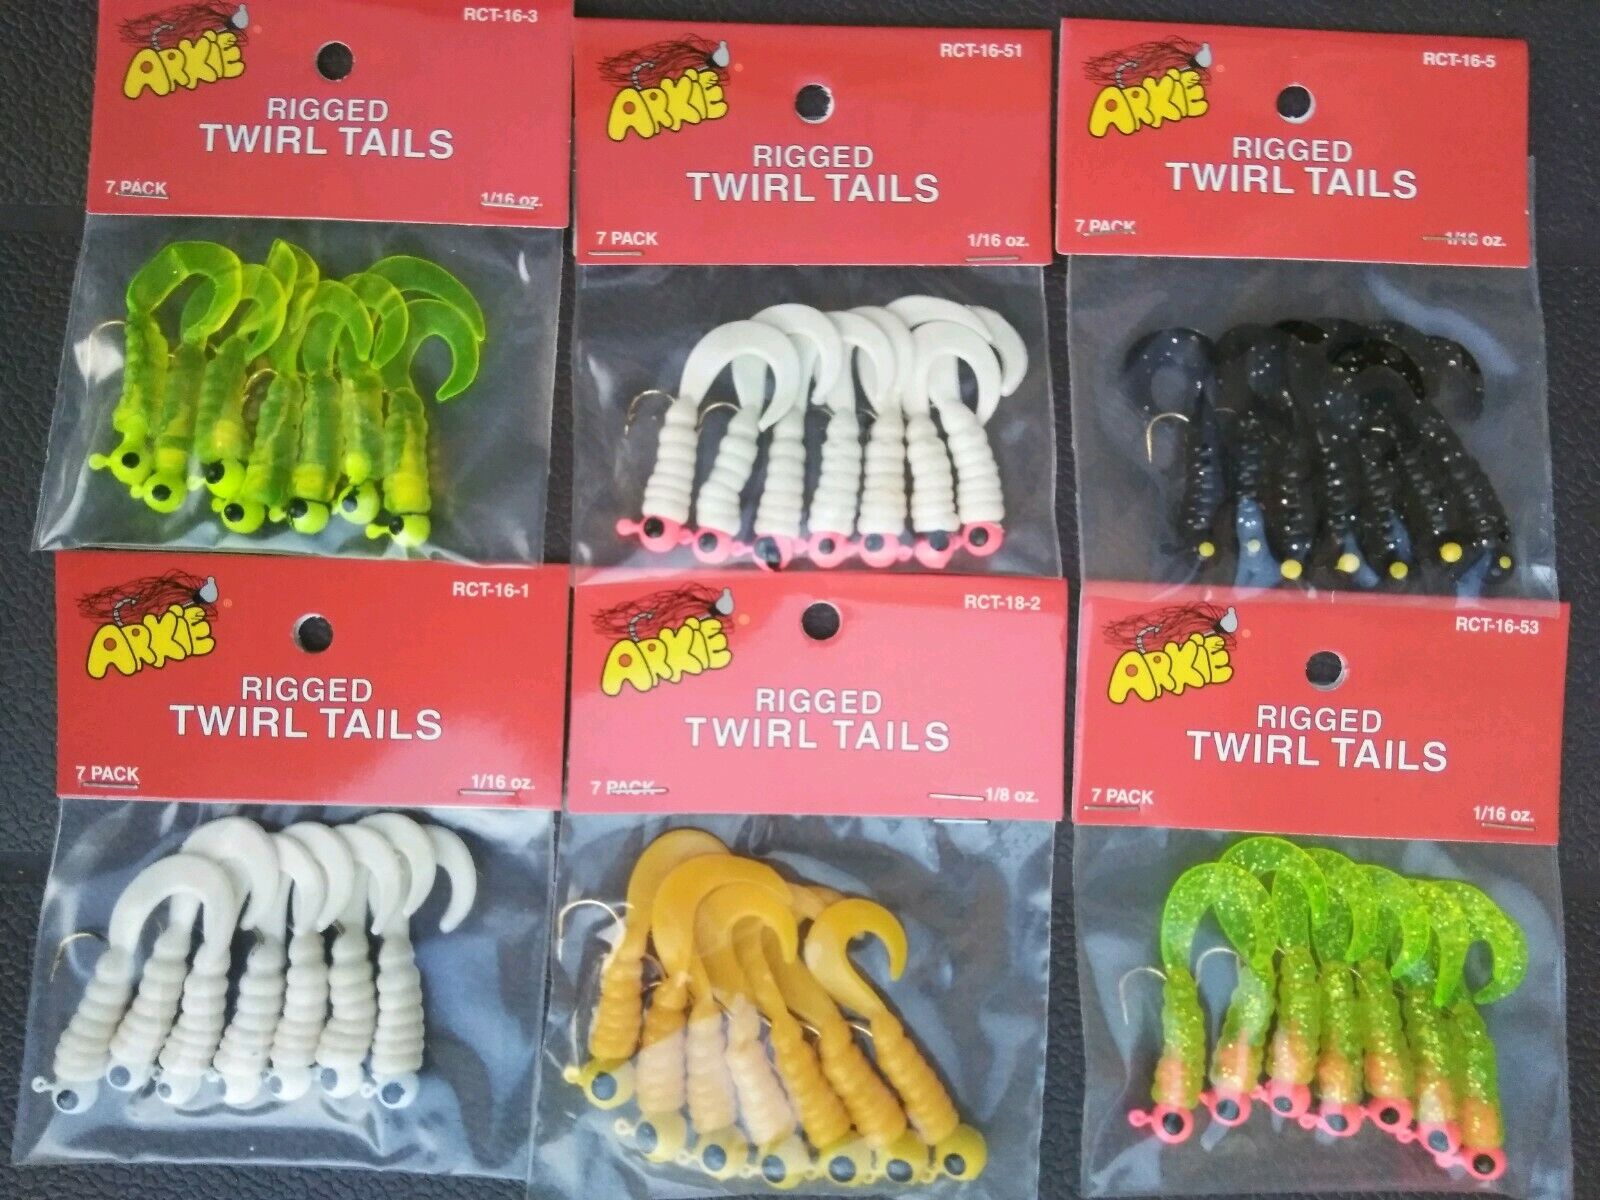 Arkie Rigged Twirl Tails grub 1/16 1/8 Oz Crappie Jigs Lot 6-Pack assortment 42  Arkie Does Not Apply